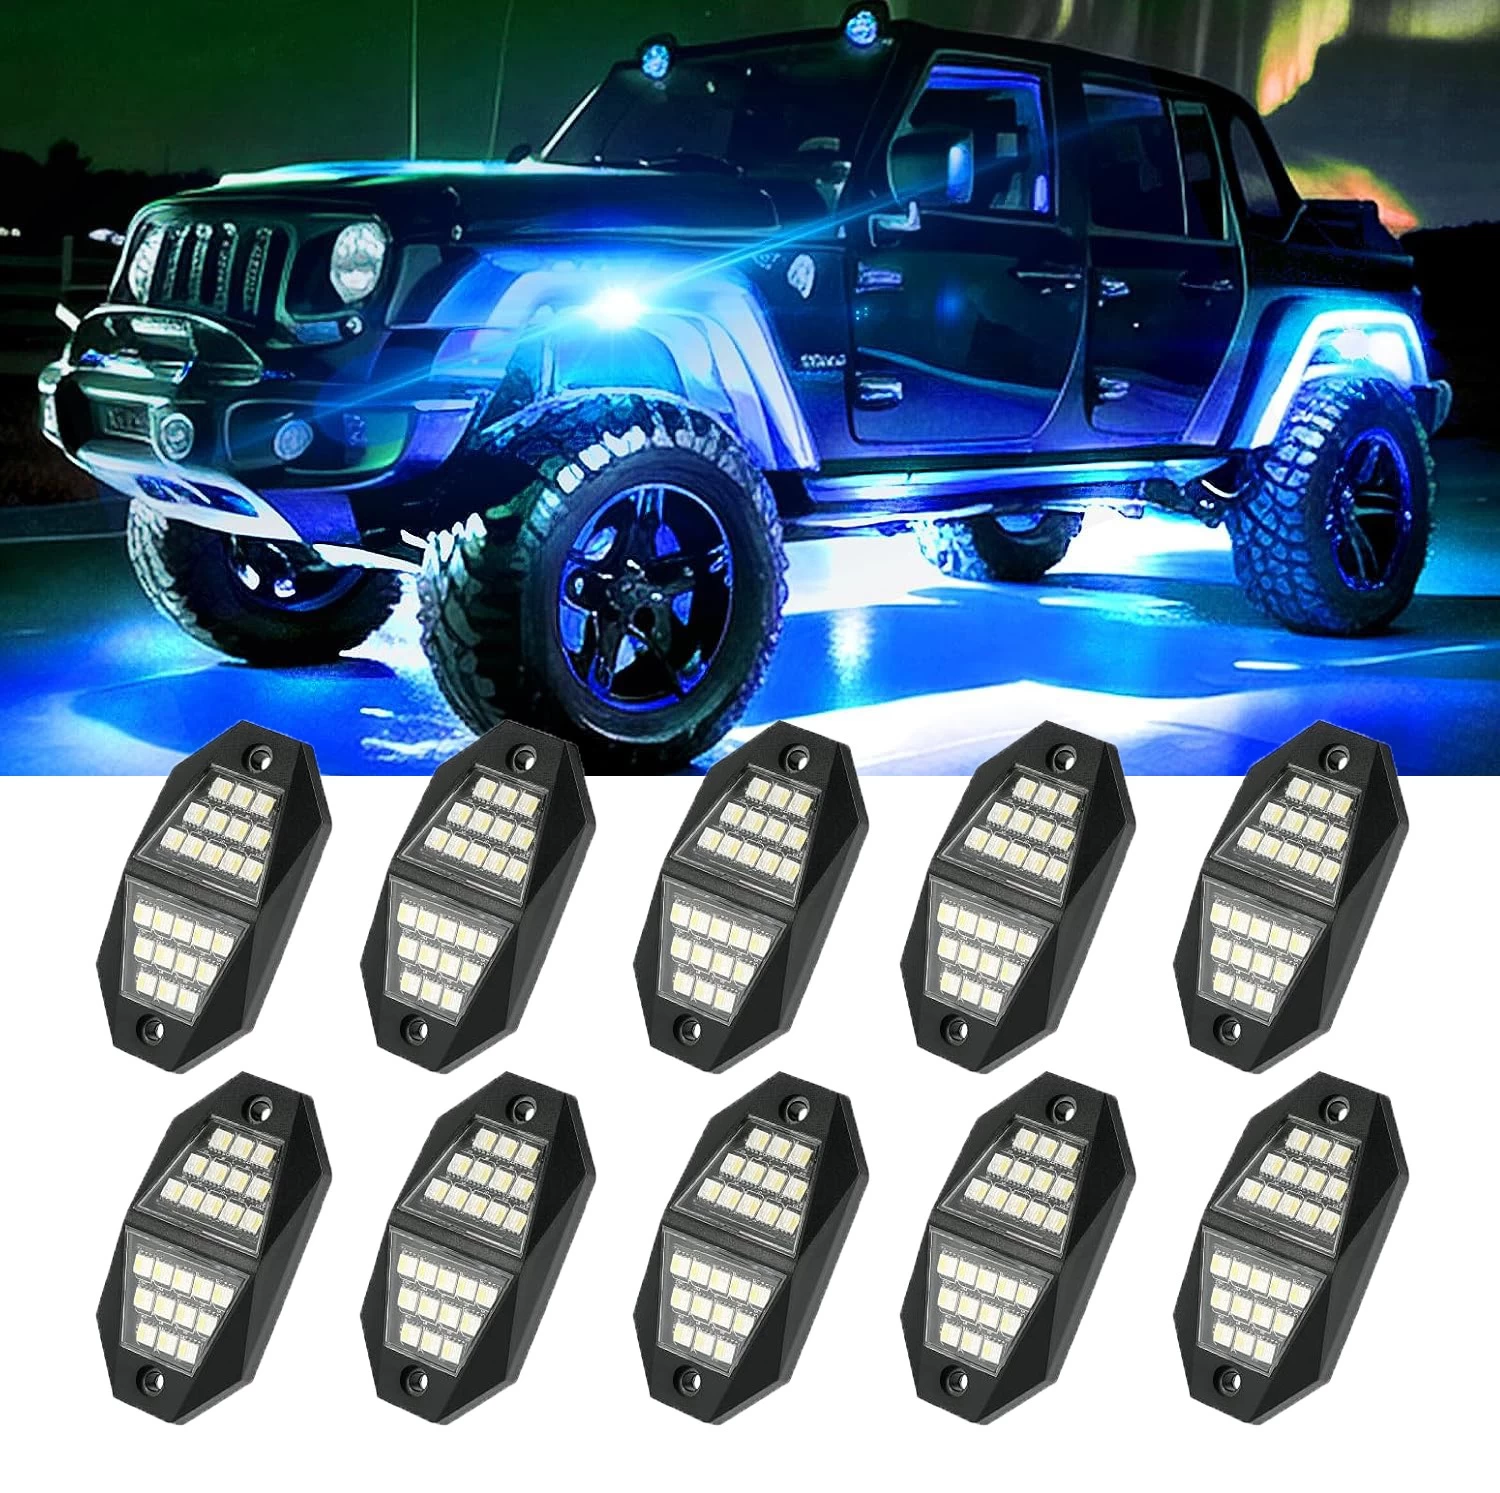 China 5 Sides LED Rock Lights 8 Pods Multicolor Underglow Lights for Trucks with App Control Flashing Music Mode RGB Rock Lights for Boat SUV Car Accessories - COPY - lf3jlu fabricante